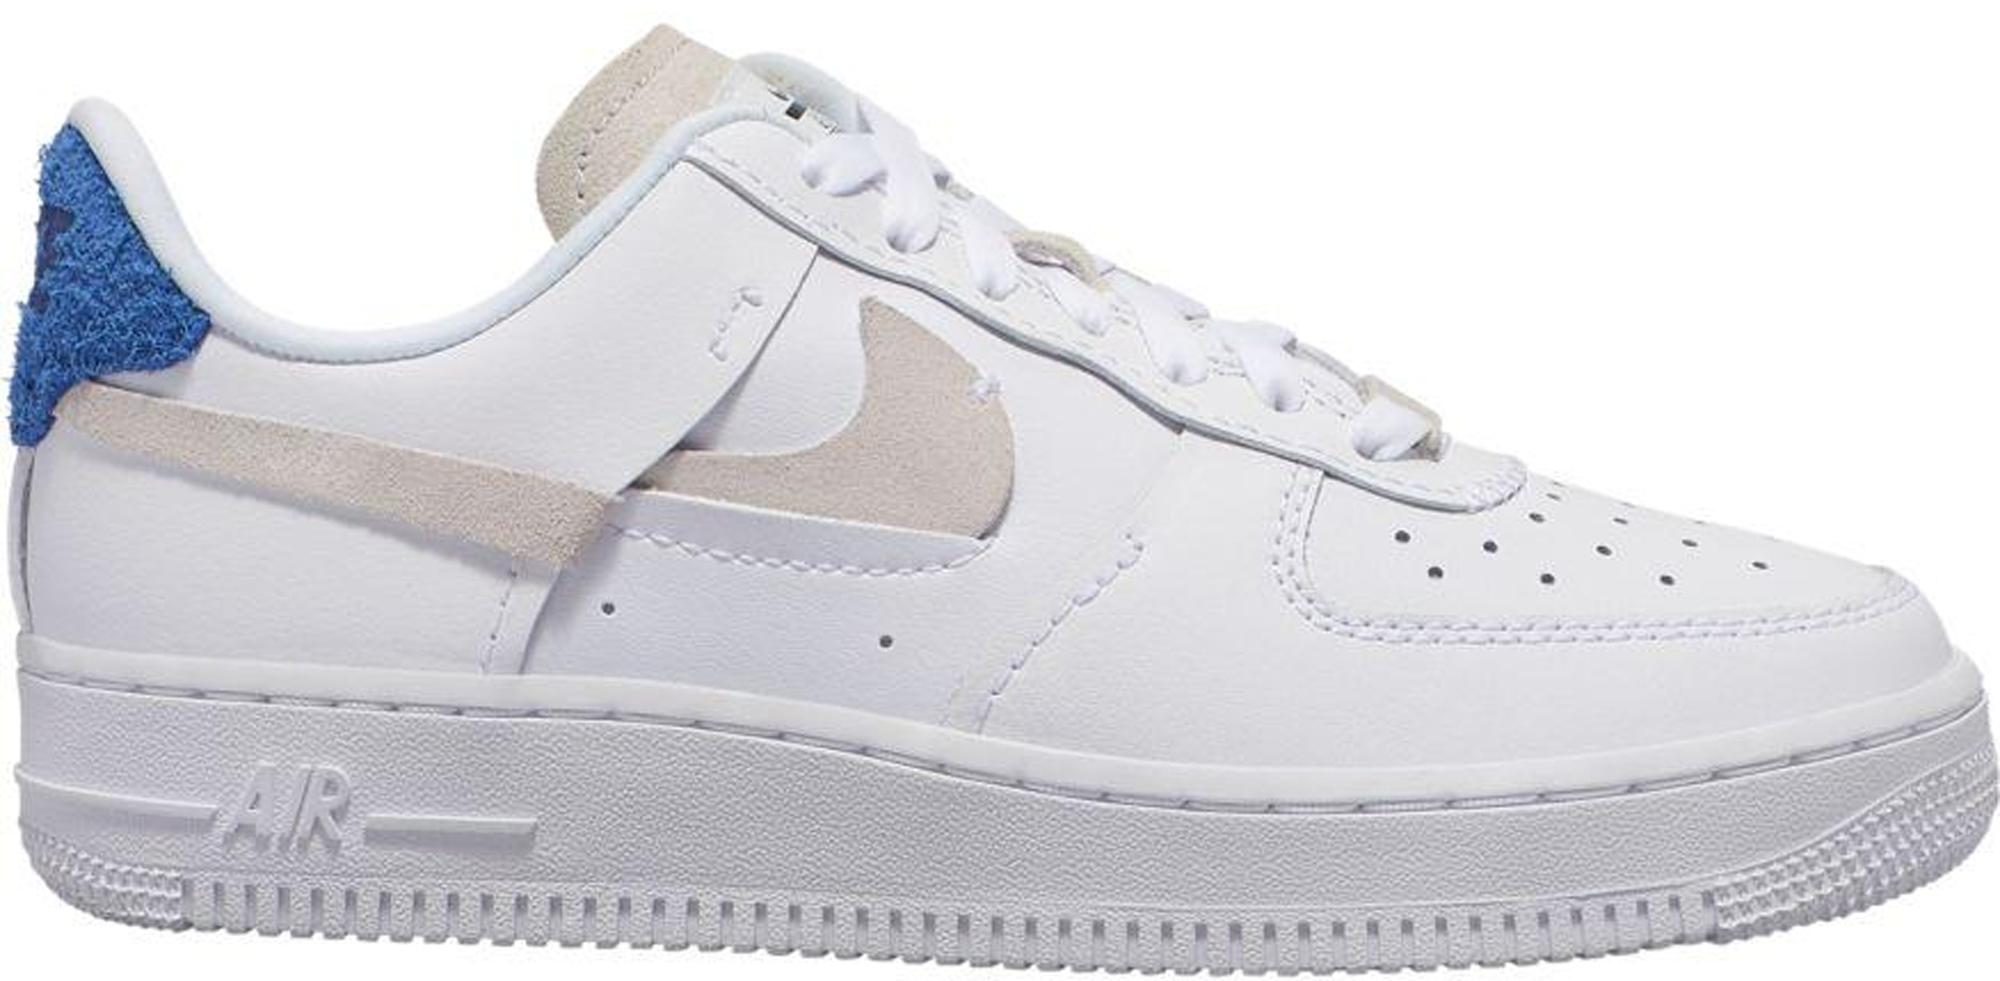 air force ones vandalized